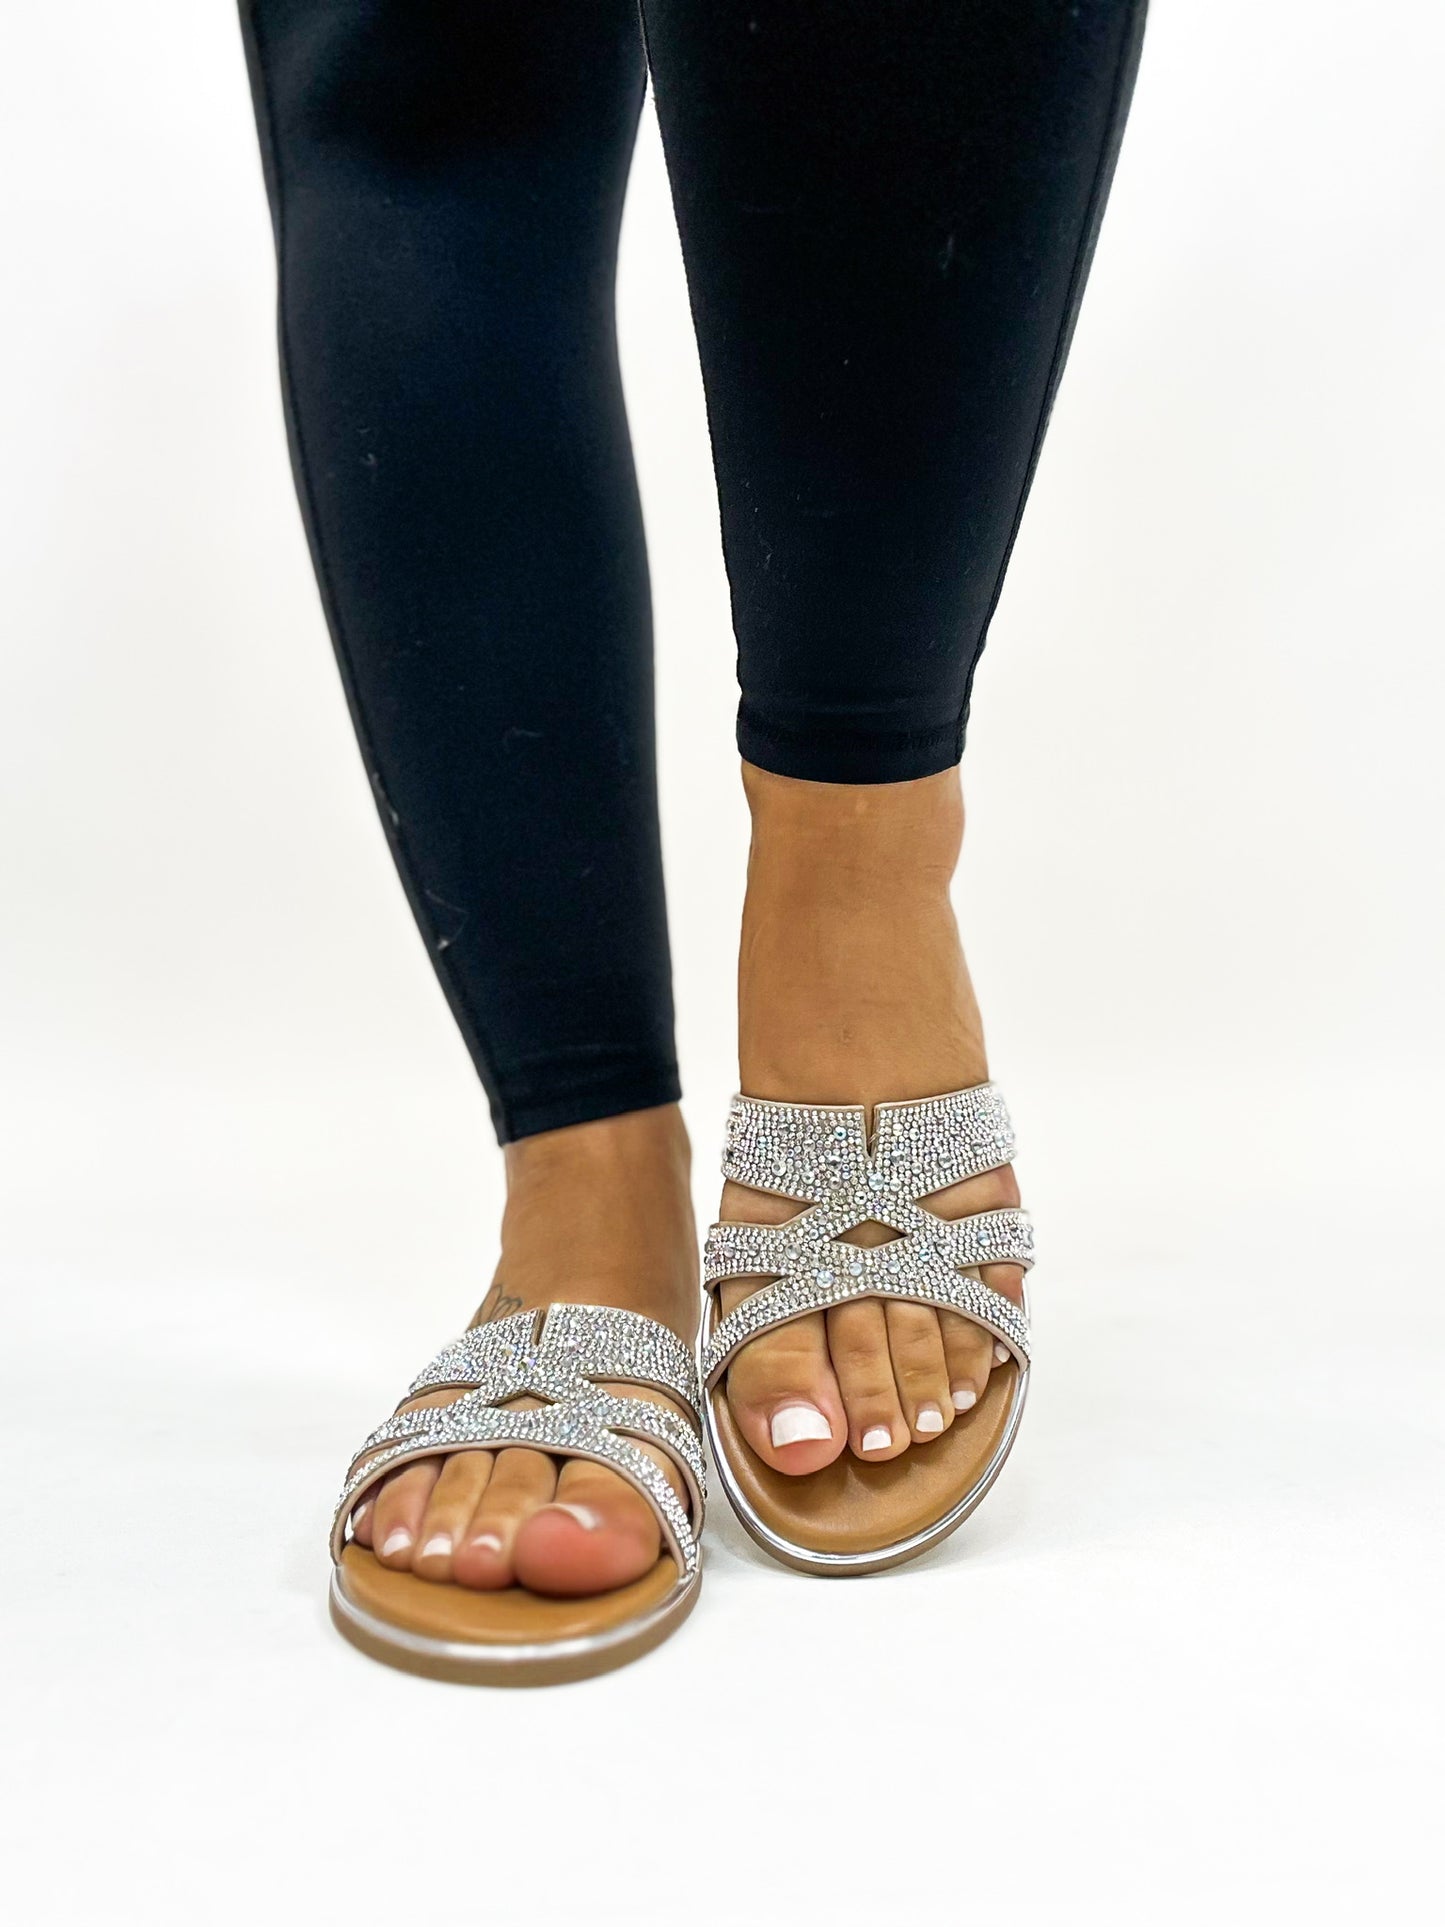 Corky's Clear Flair Sandals